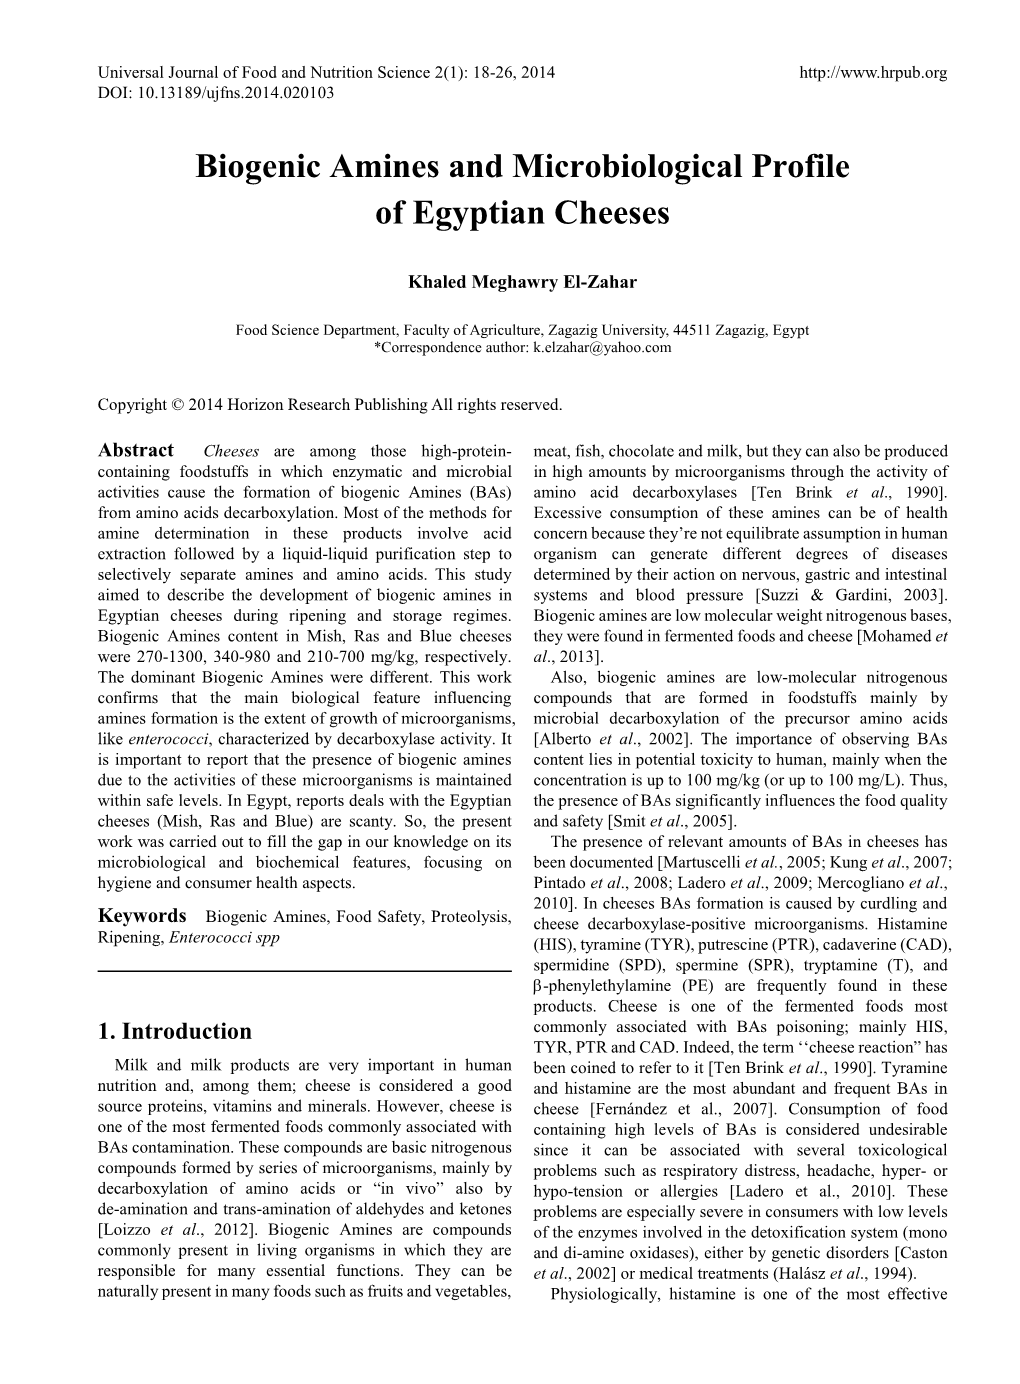 Biogenic Amines and Microbiological Profile of Egyptian Cheeses